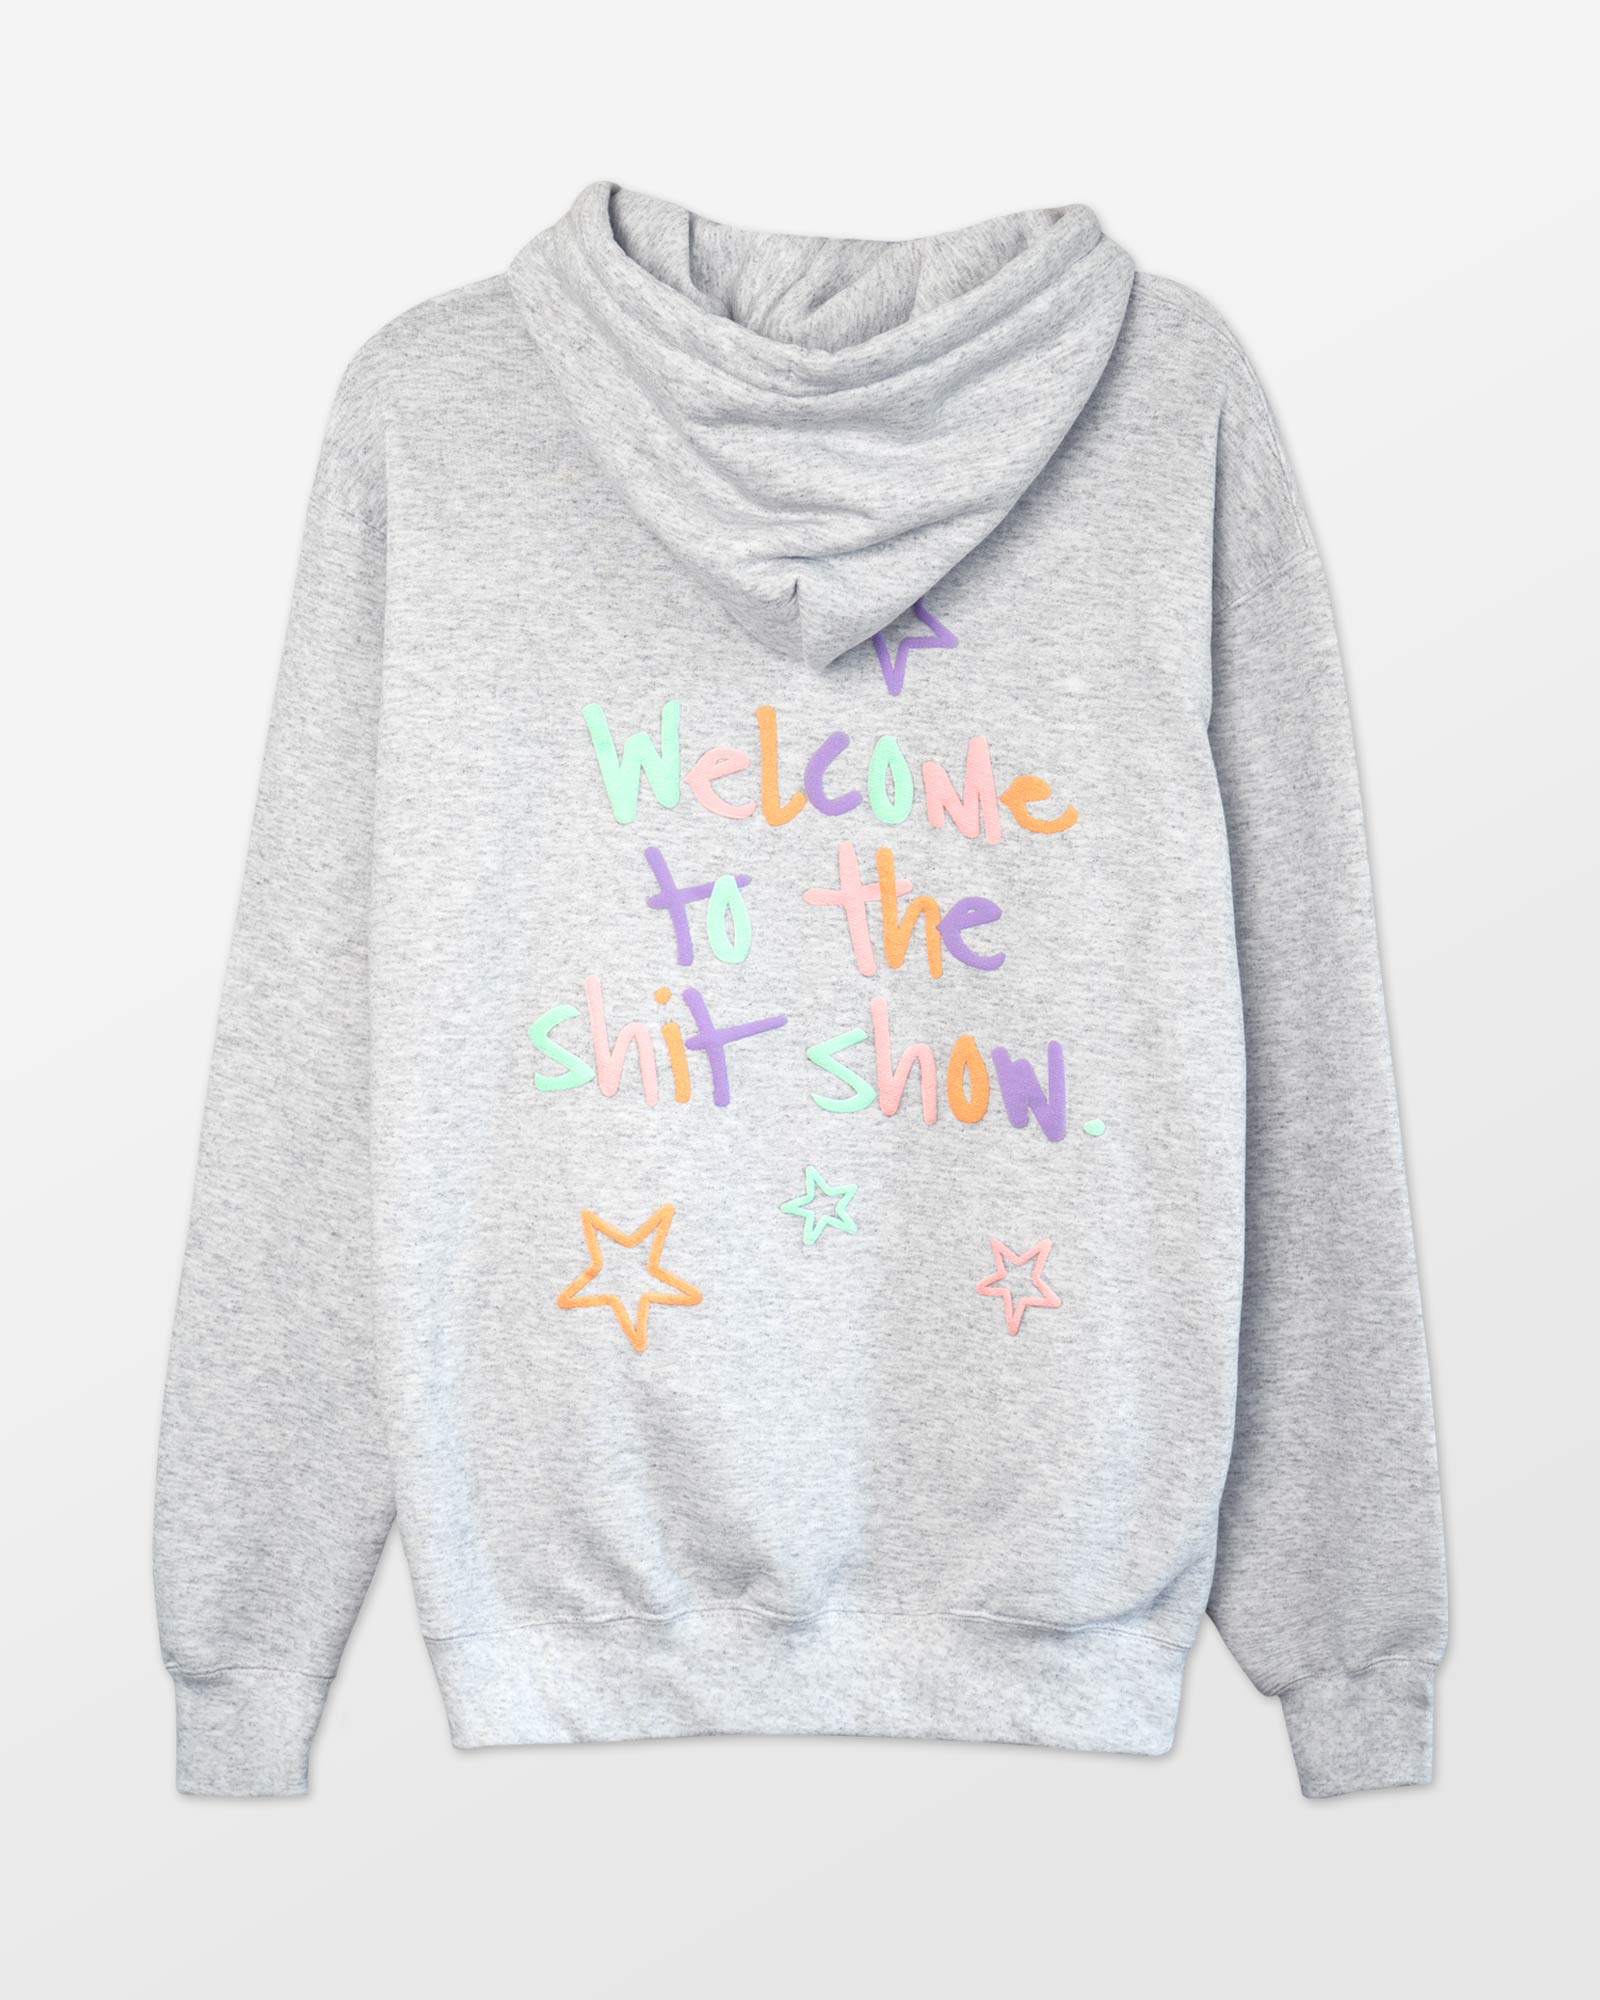 "Welcome to the Shit Show" Hoodie